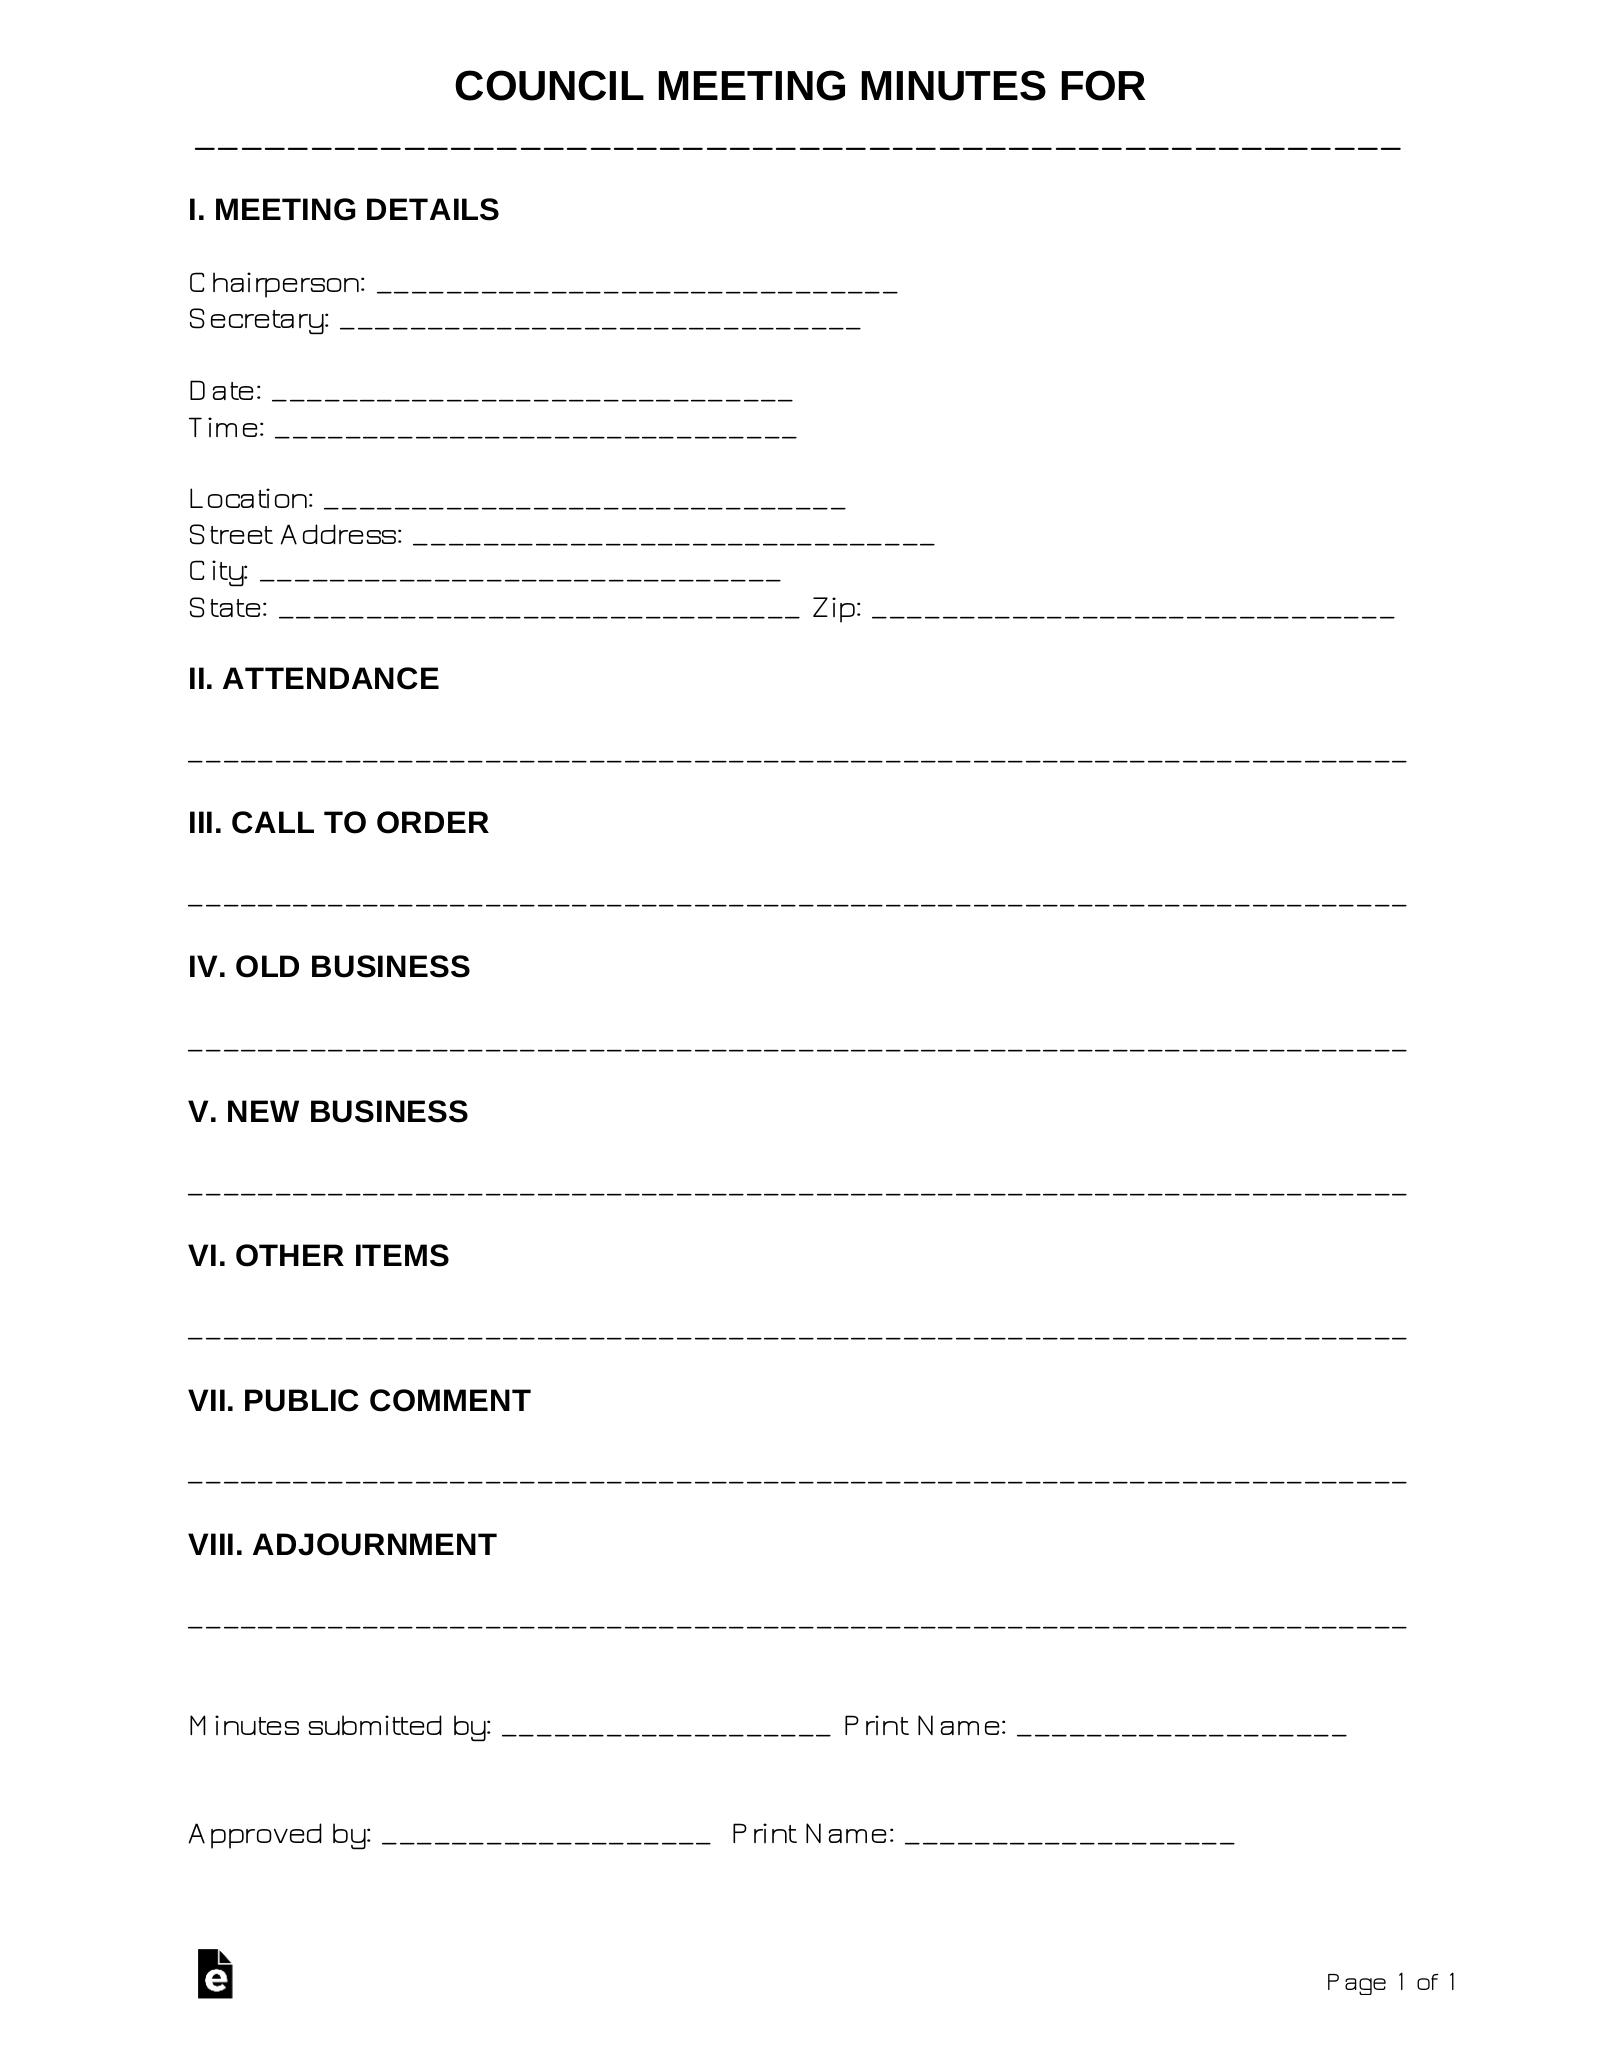 Council Meeting Minutes Template | Sample